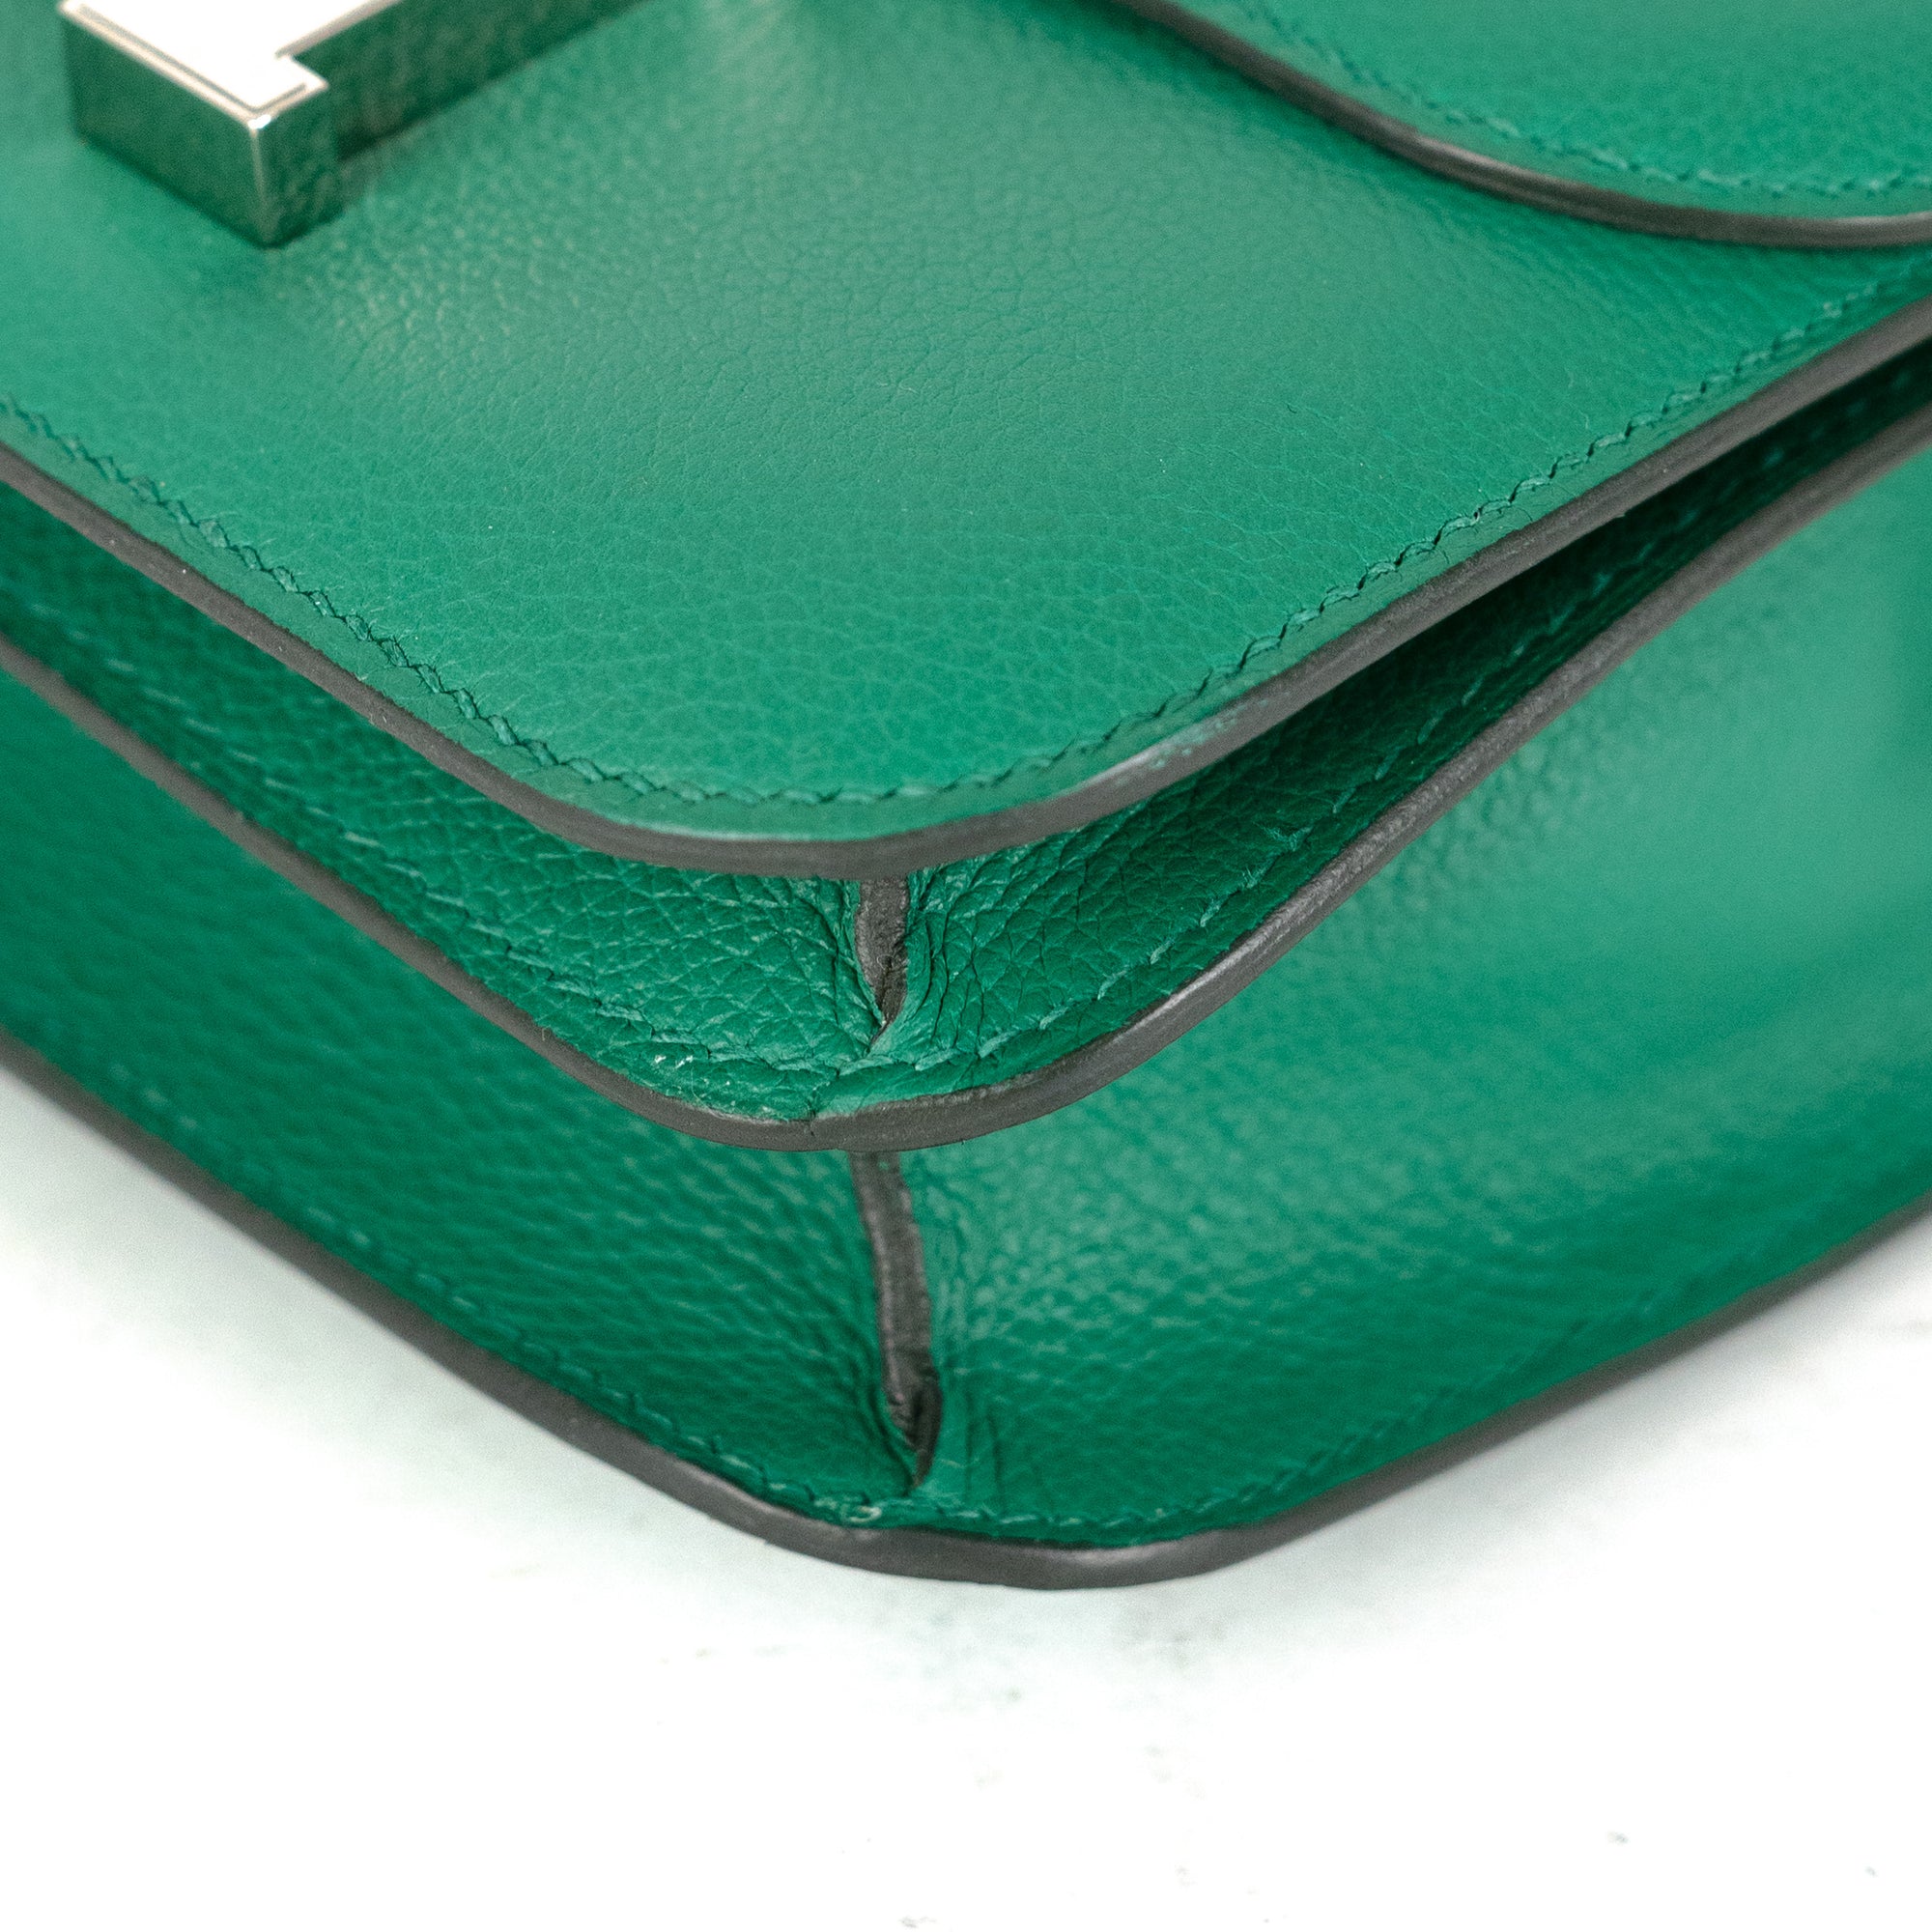 Hermes Constance 18 Evercolor Green - C stamp - THE PURSE AFFAIR